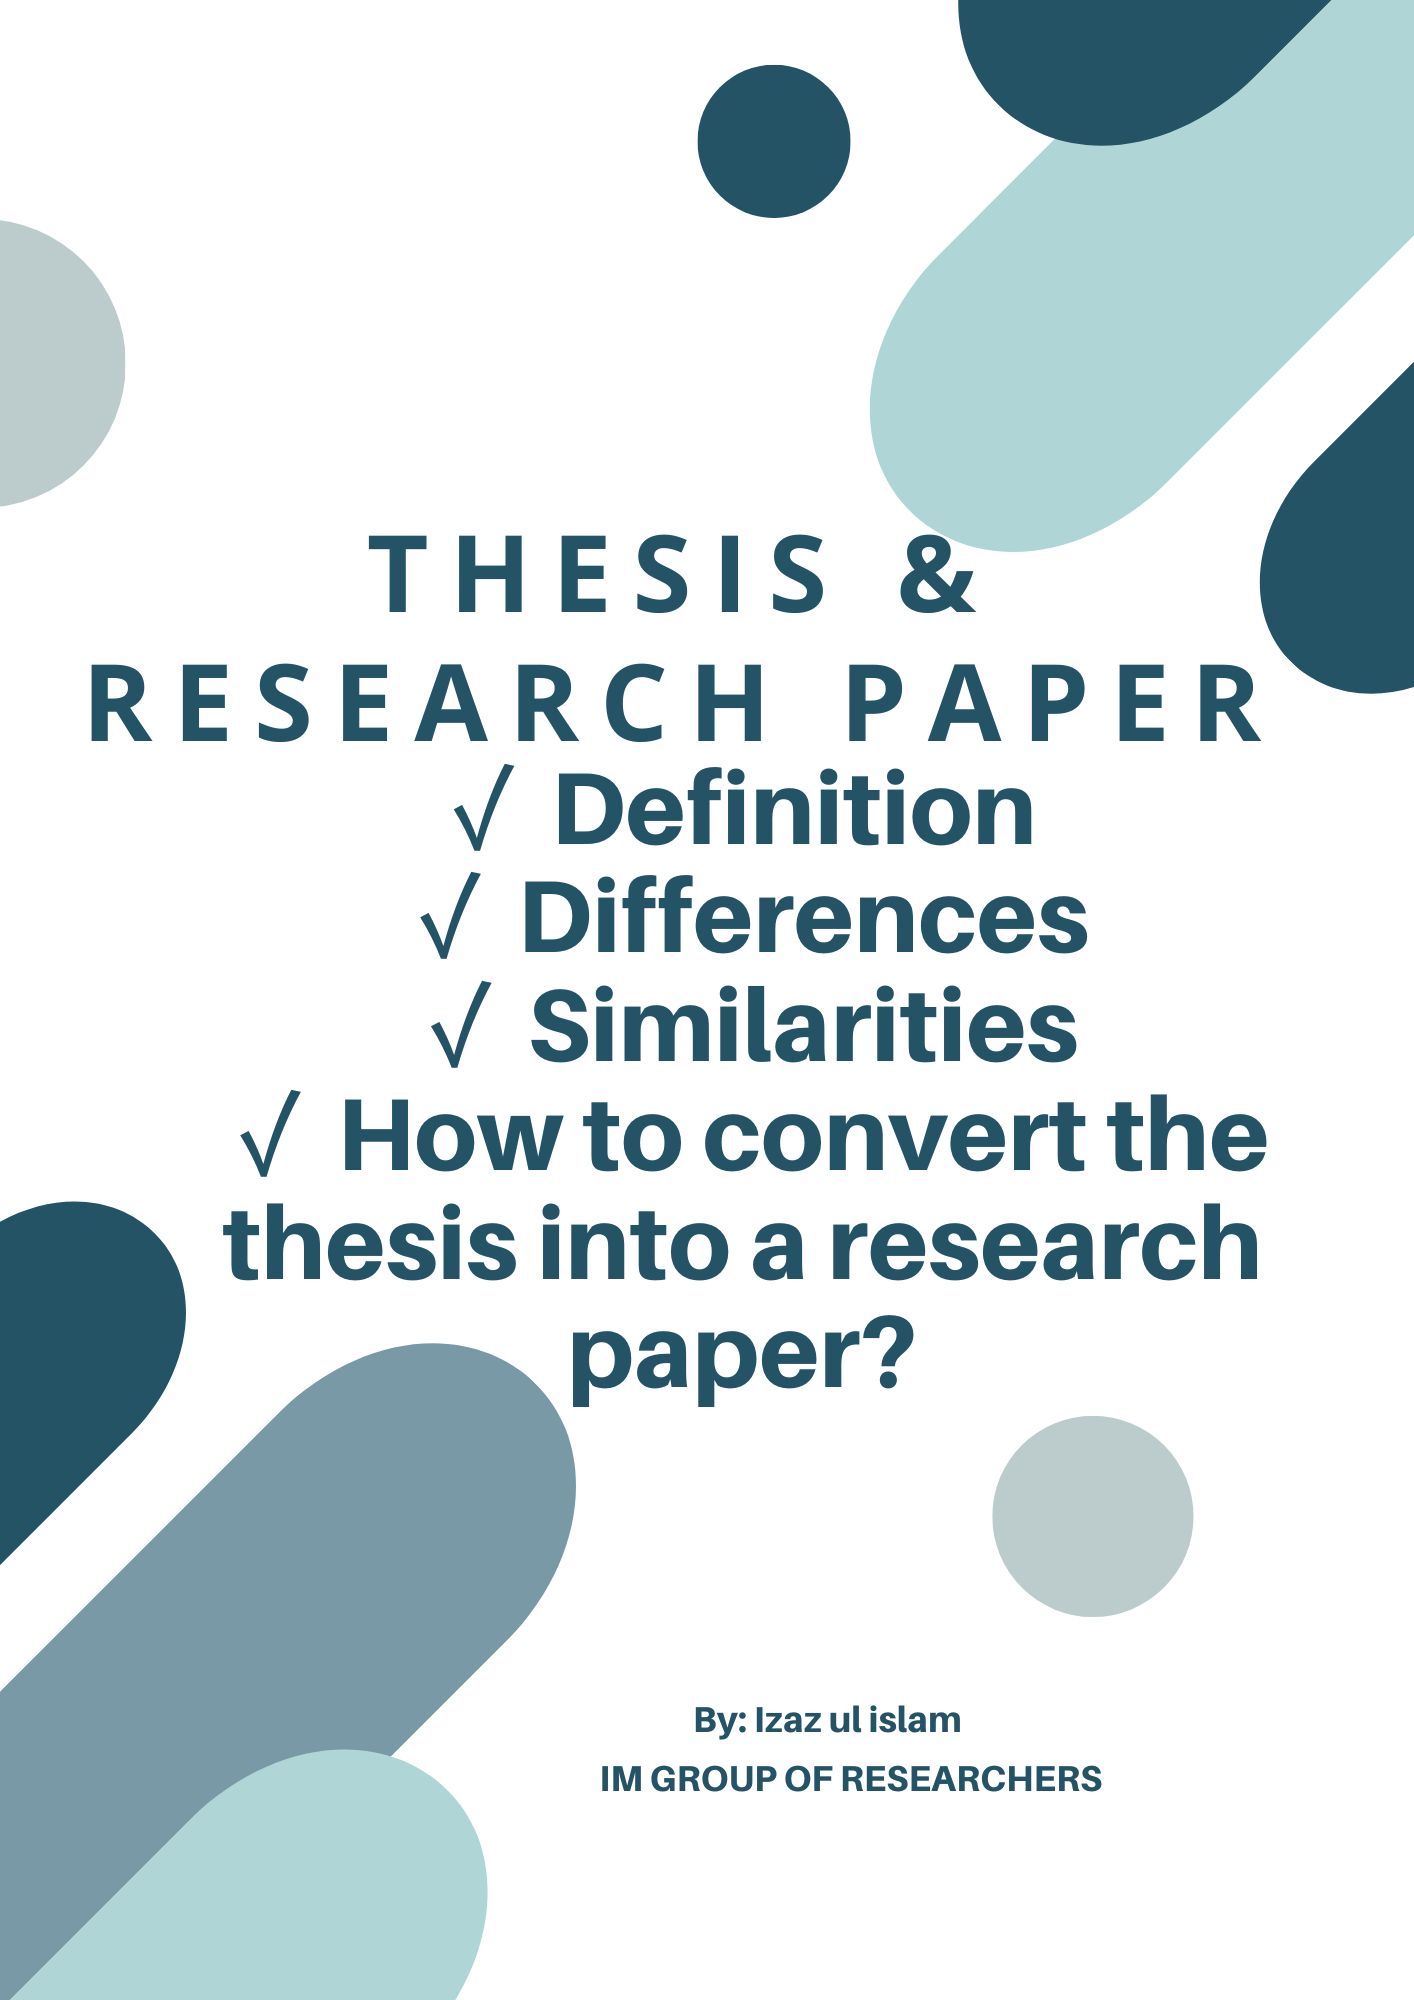 Thesis & Research Paper Definitions Differences Similarities, How to Convert the Thesis into a Research Paper?